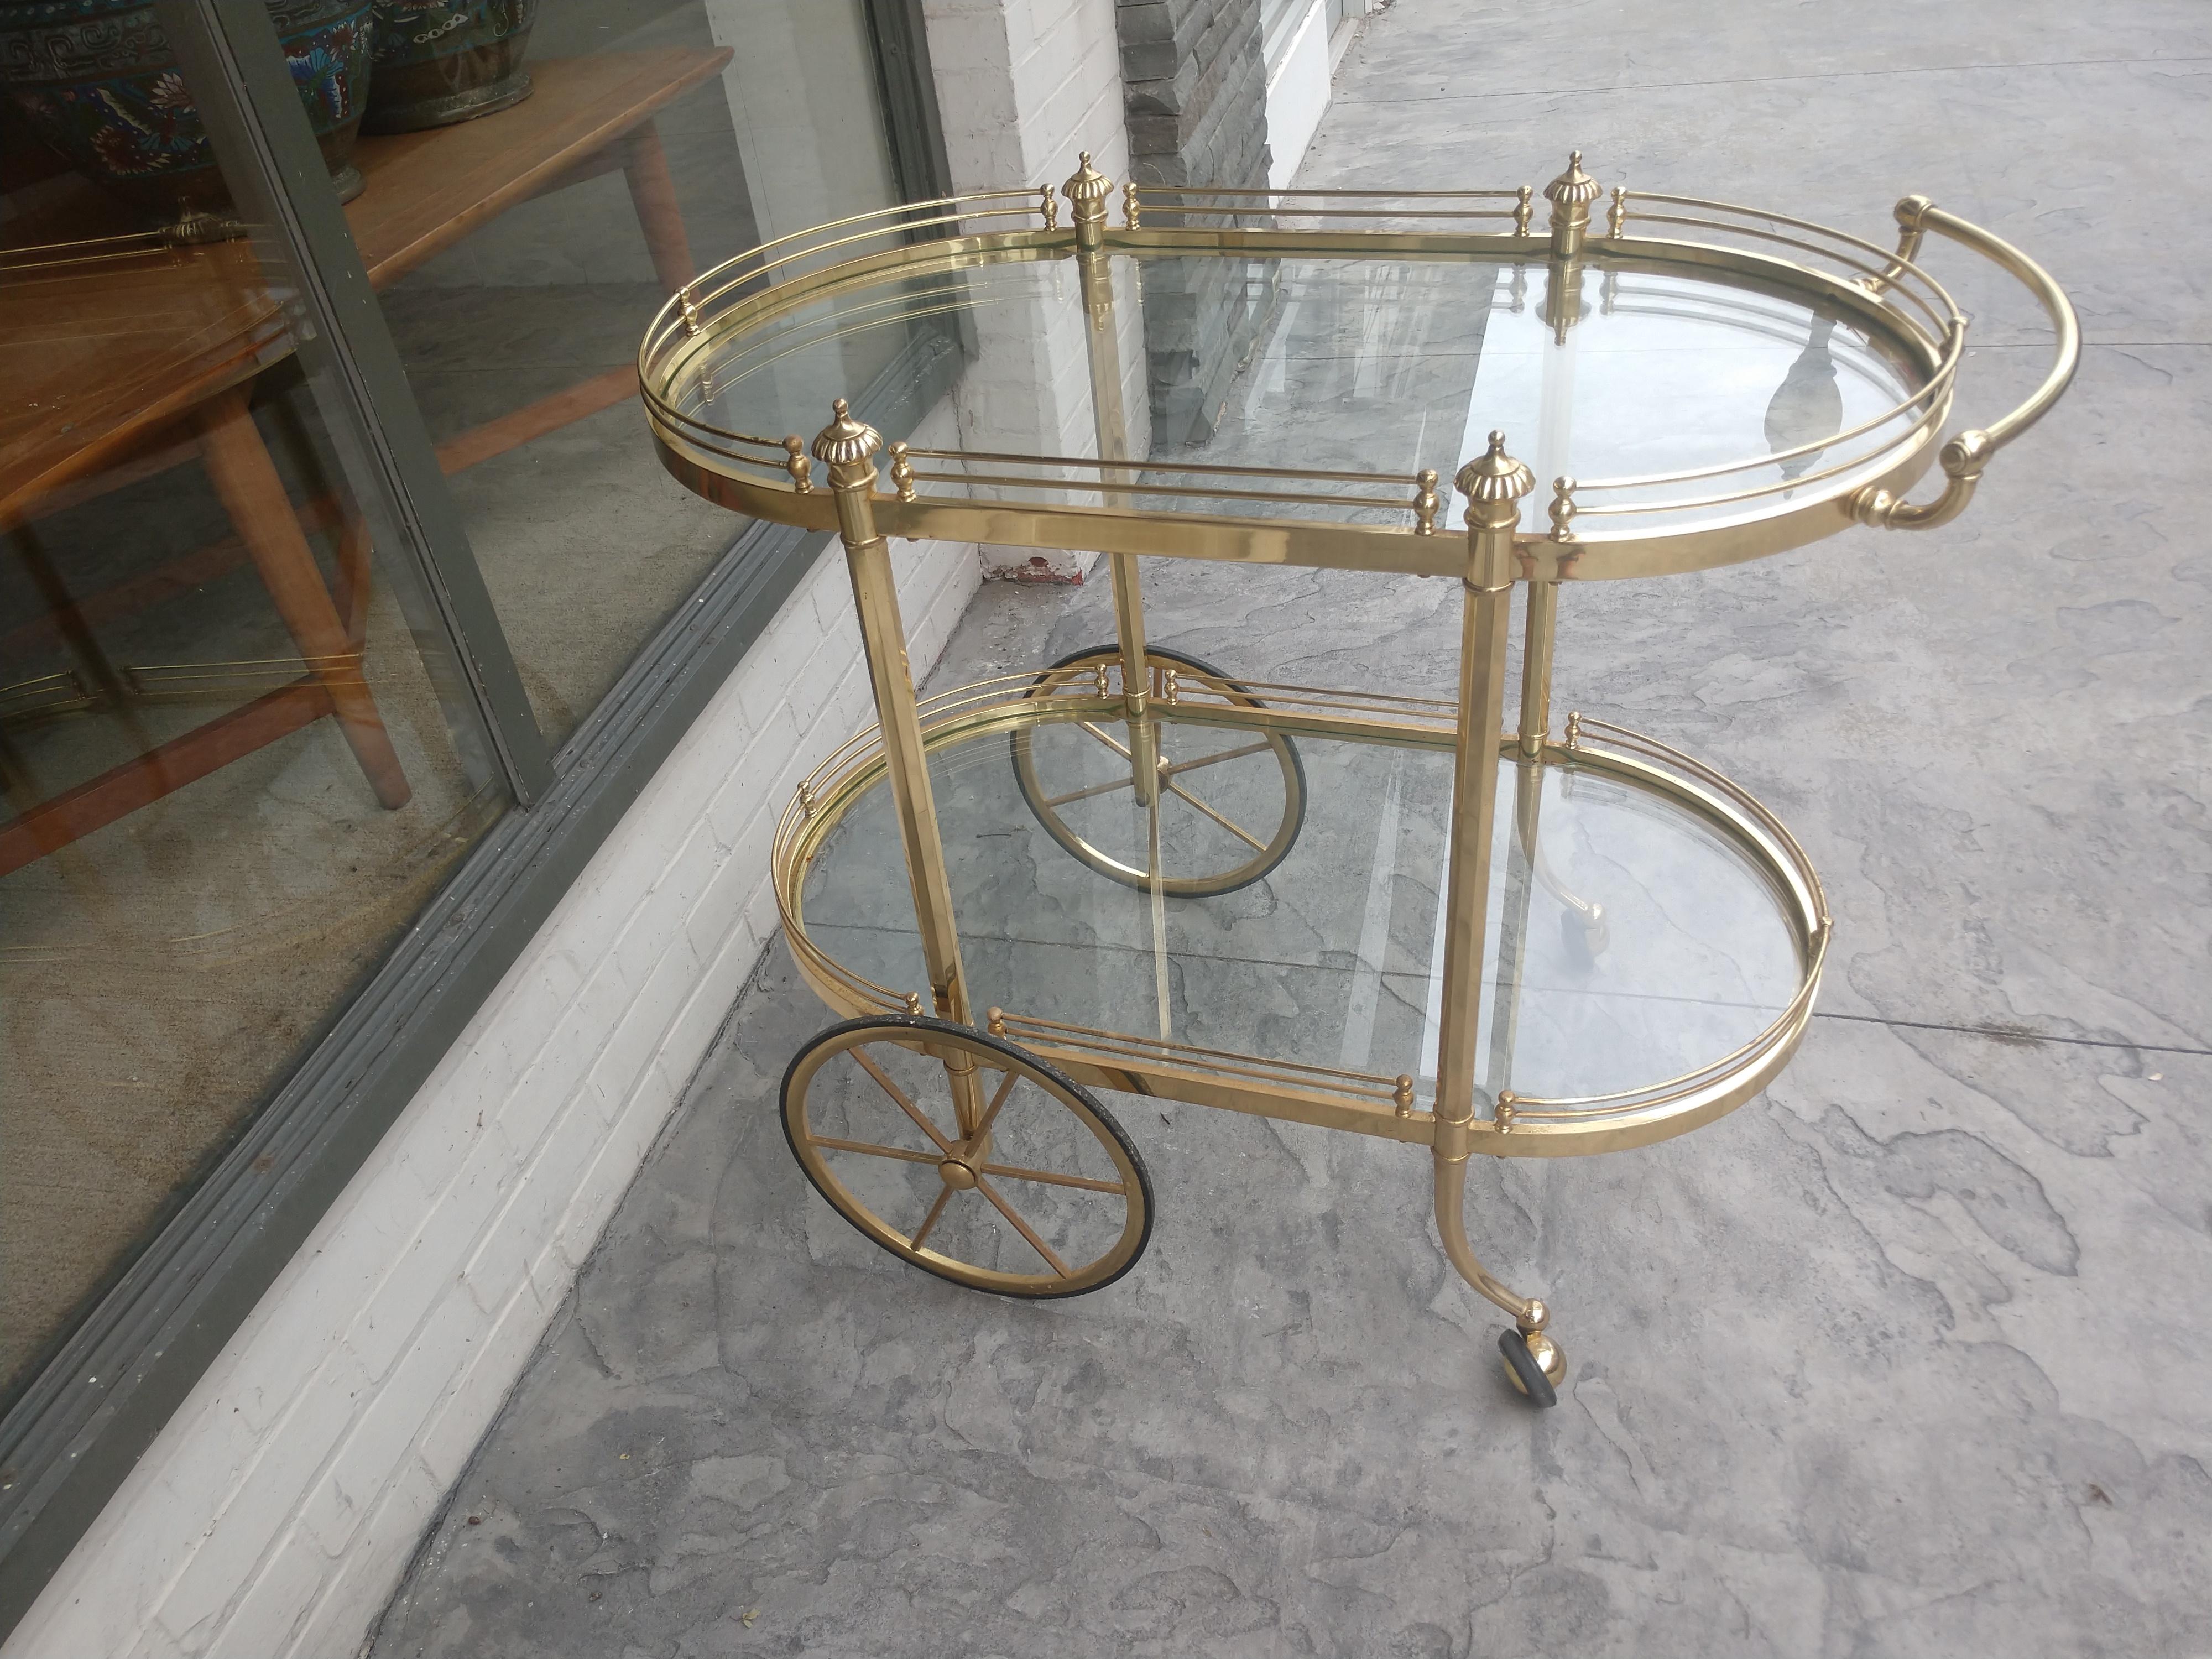 Elliptical in shape with two tiers surrounded by a gallery. Glass is perfect. Cart glides along. Brass retains original patina.l